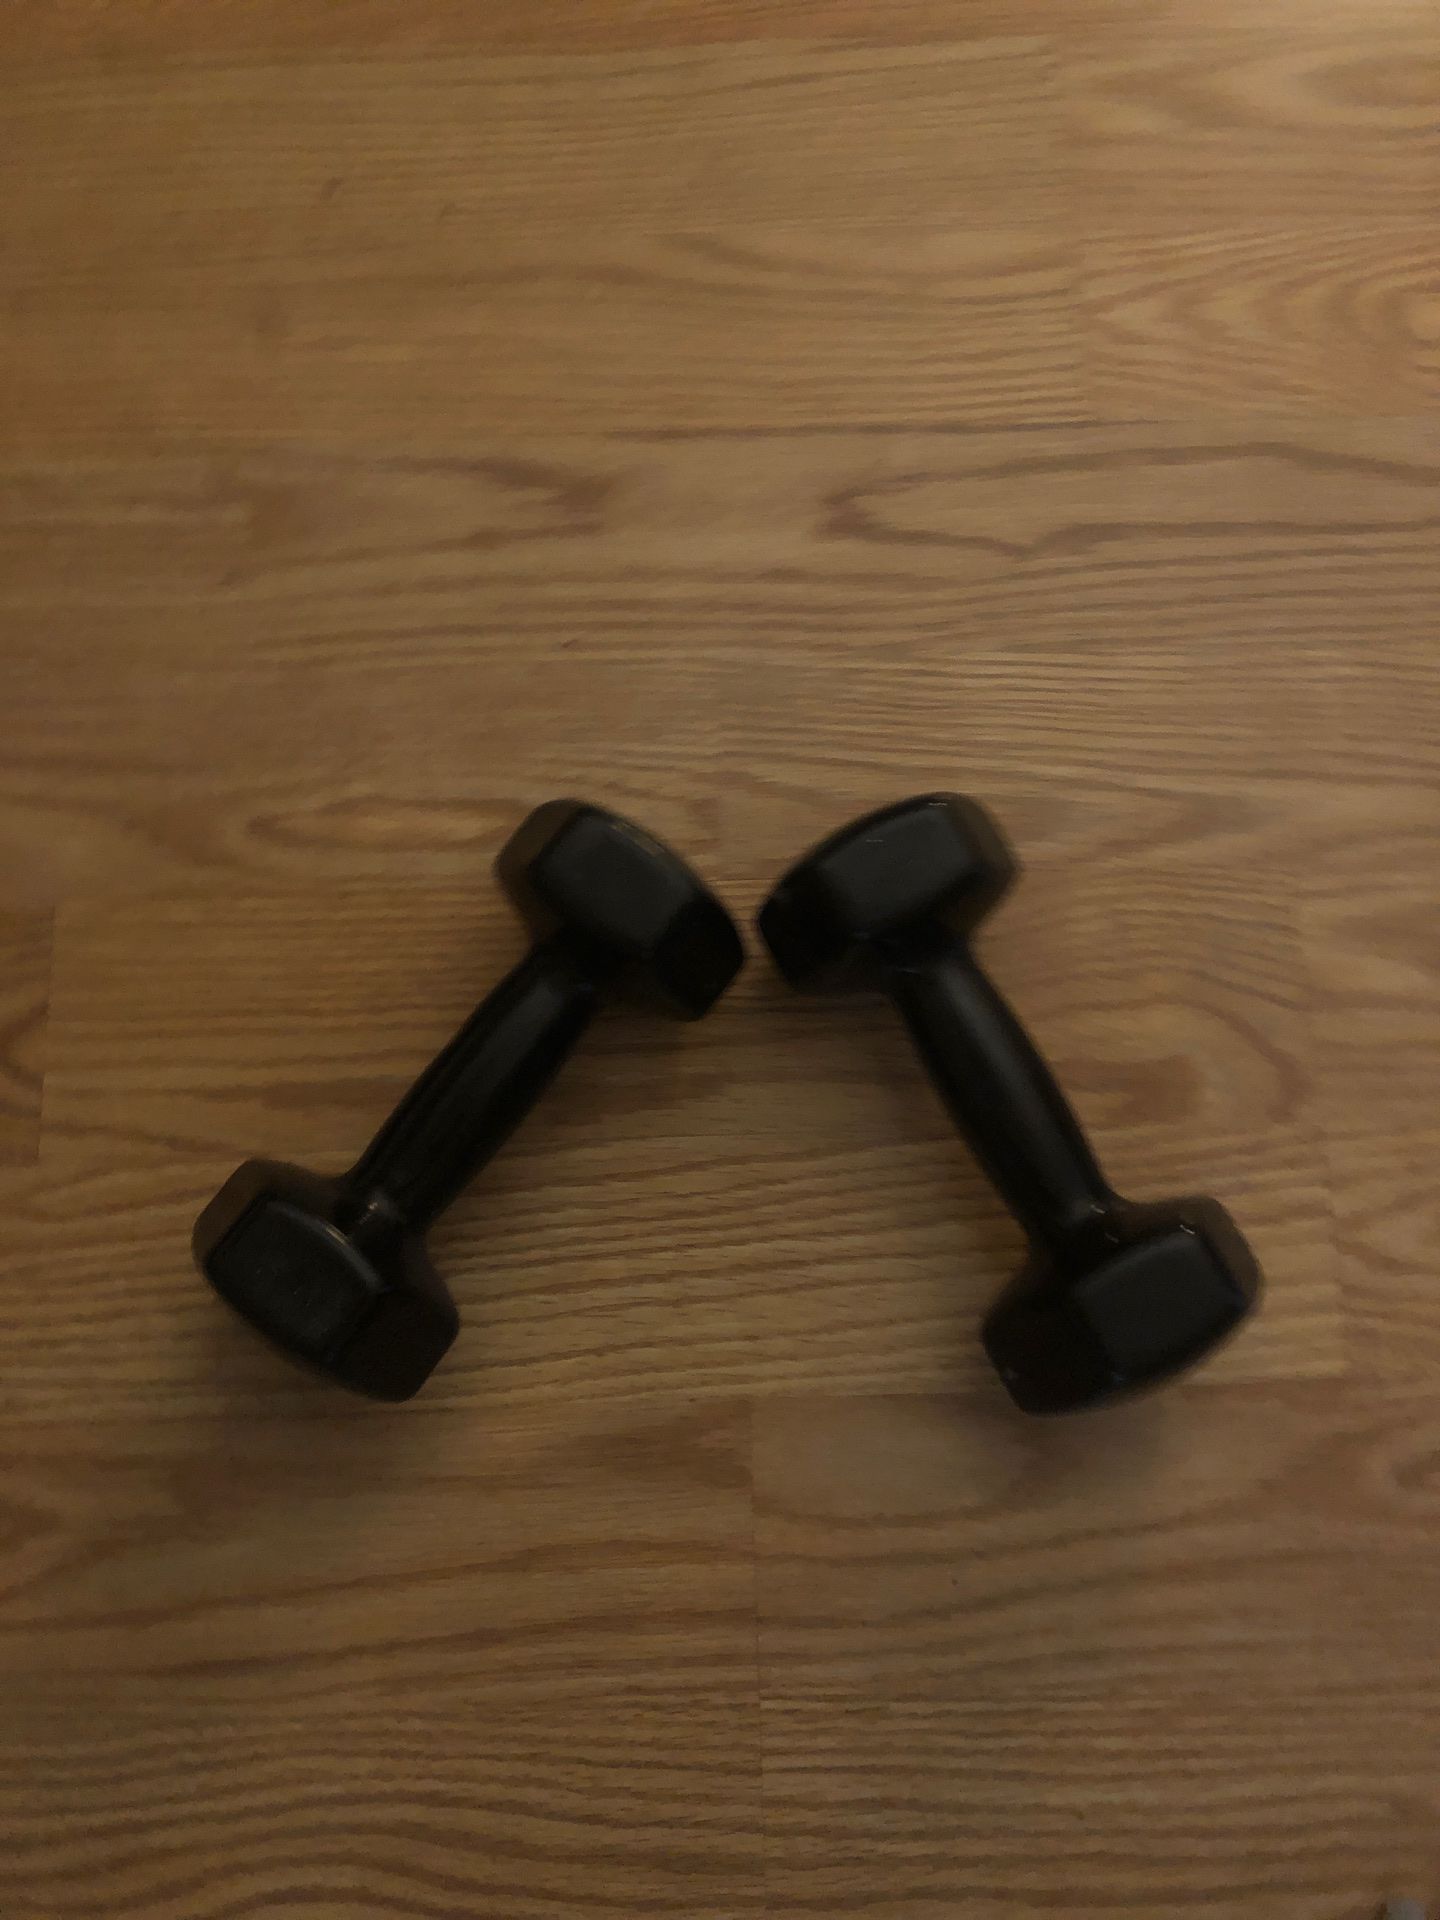 Spri dumbells 8 pounds each one total 16 lbs